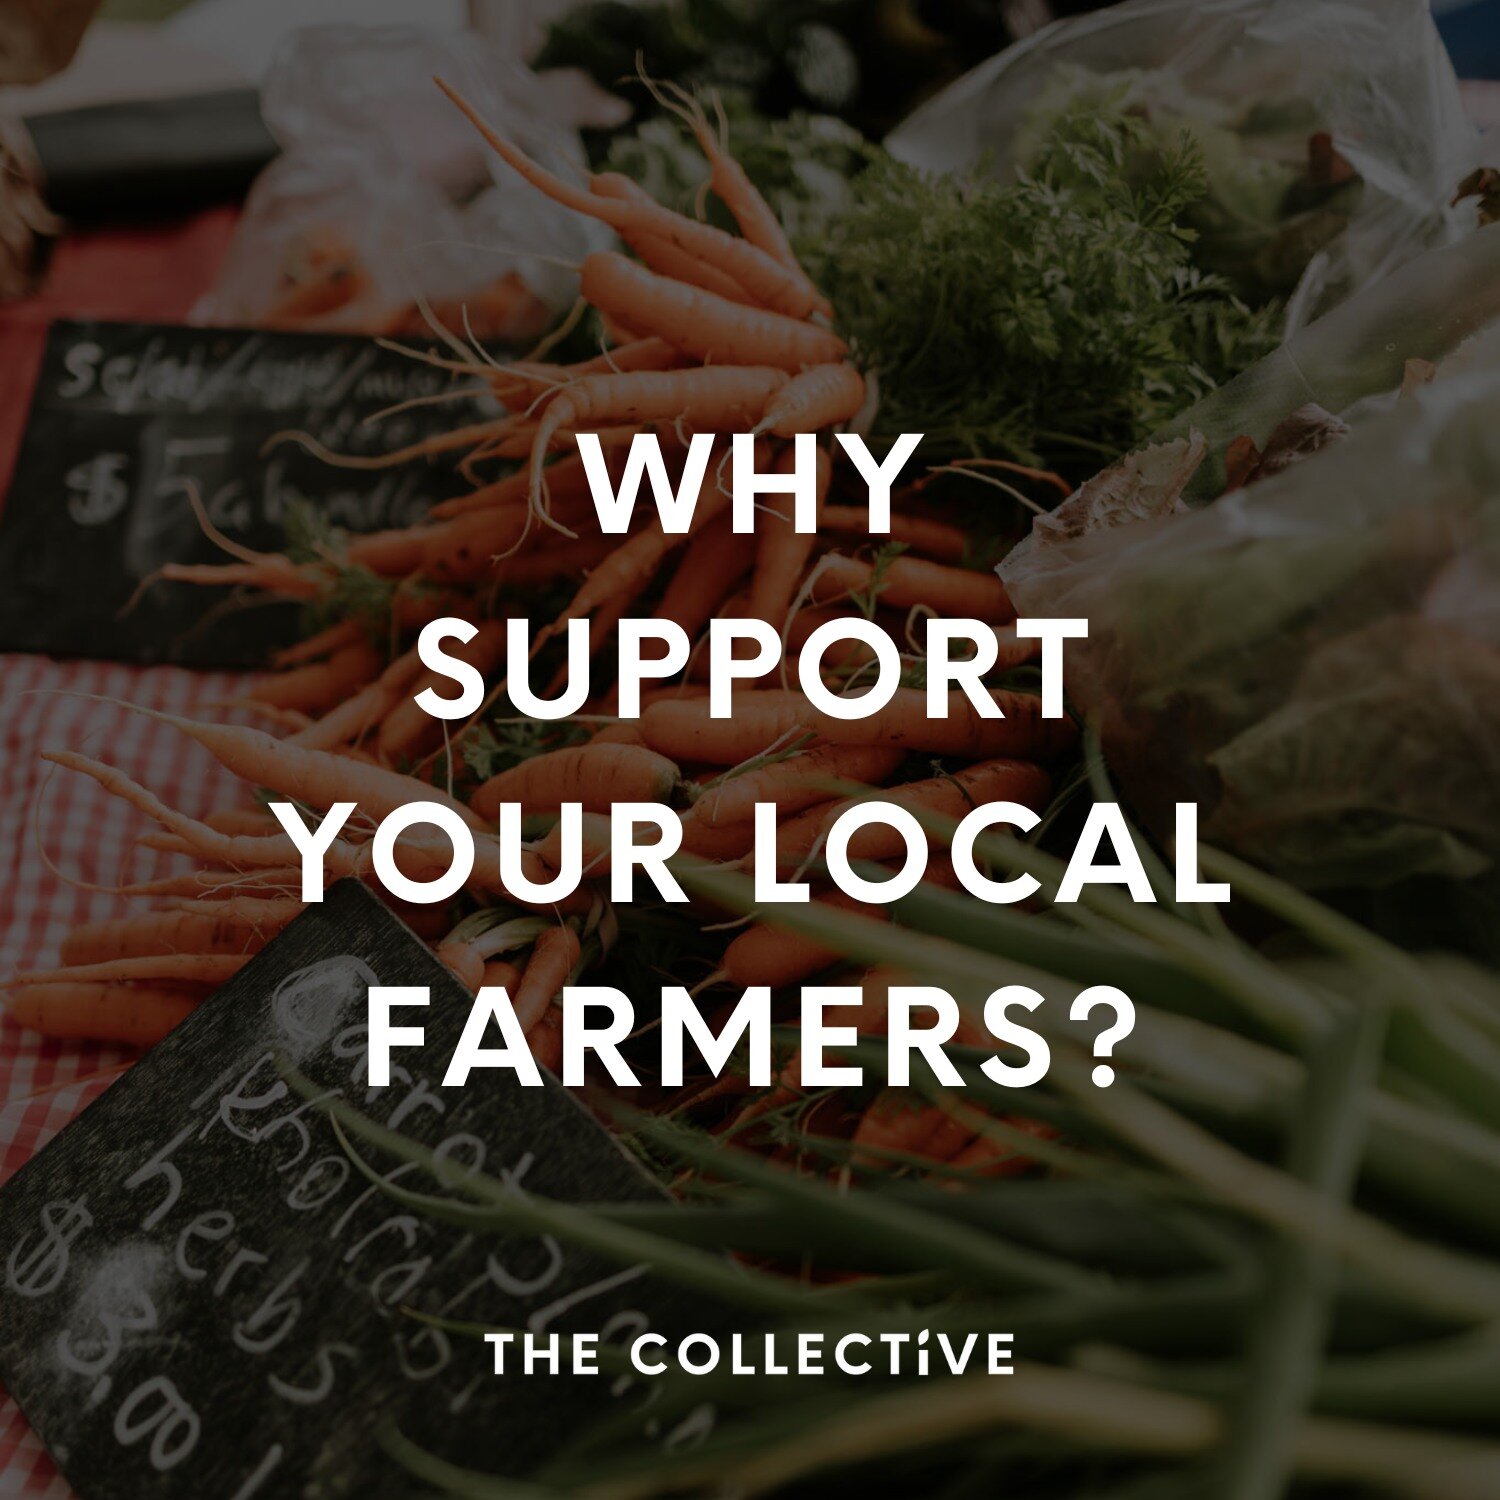 There are so many valuable reasons to support local farmers, but we want to remind you anyway!

- Freshness: Locally grown produce and meats are generally fresher and more flavorful than those that have traveled long distances.

- Environmental impac